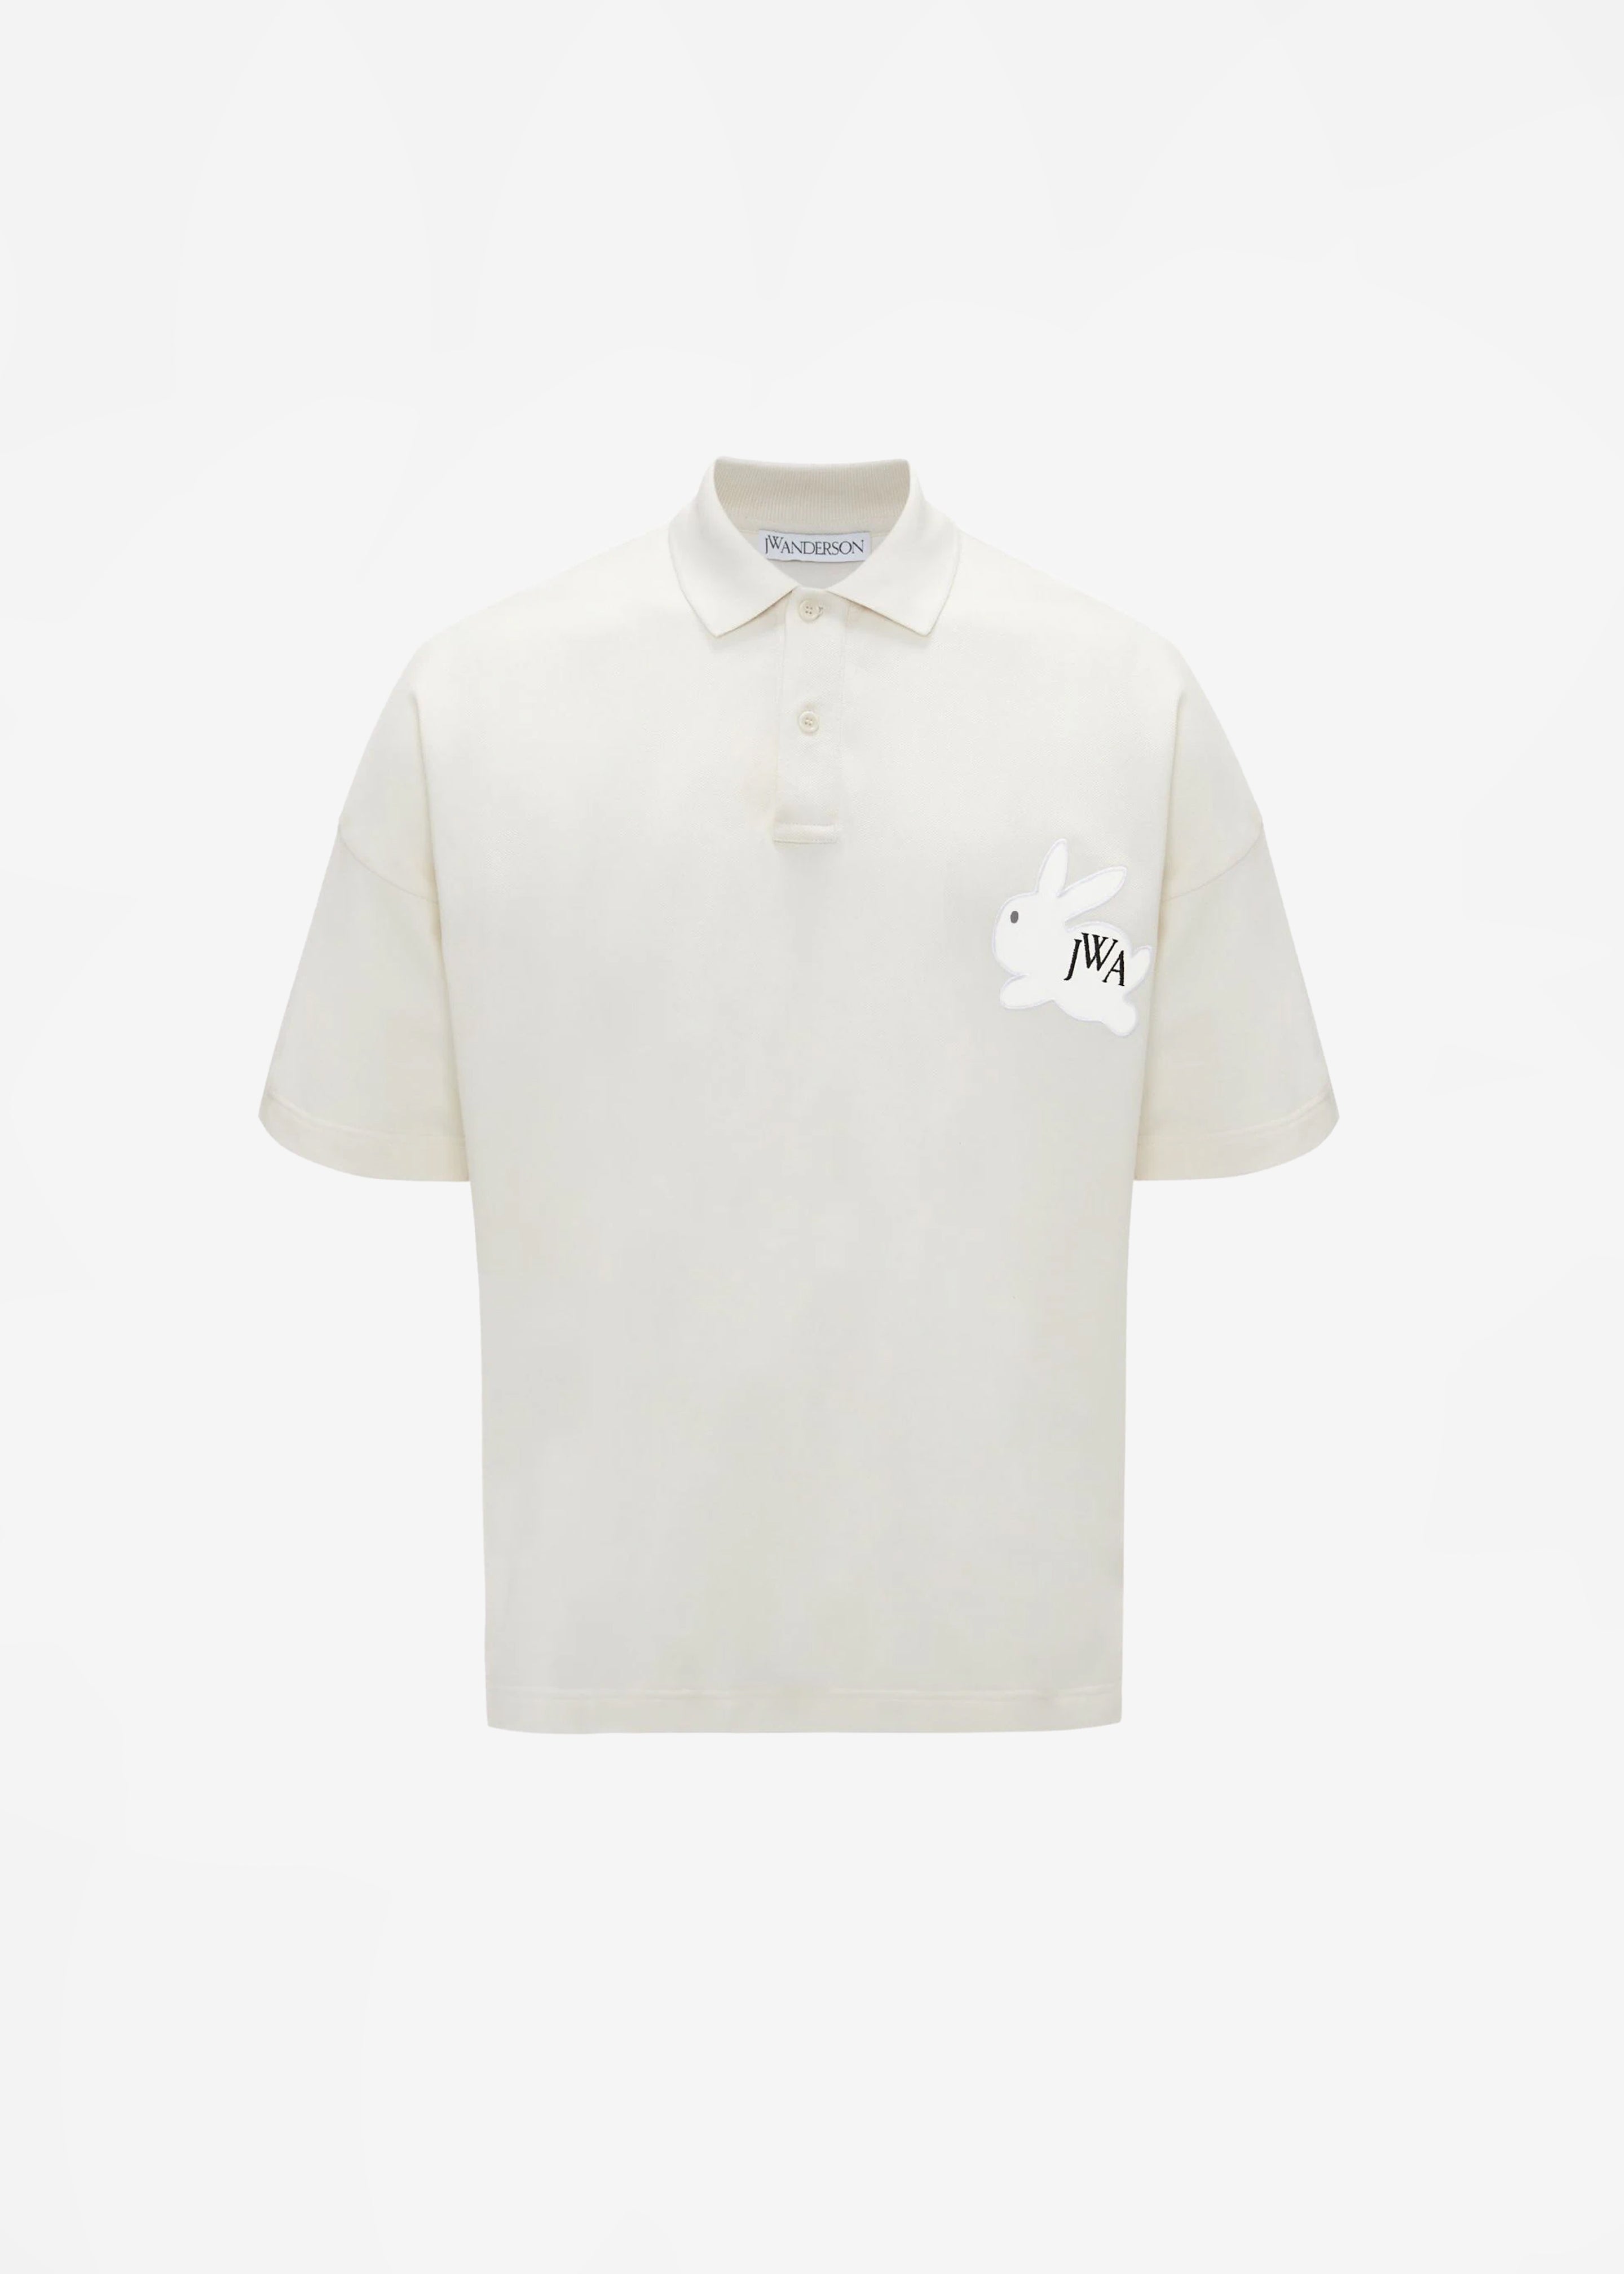 JW Anderson Bunny Embroidery Polo Shirt - Beige - 4